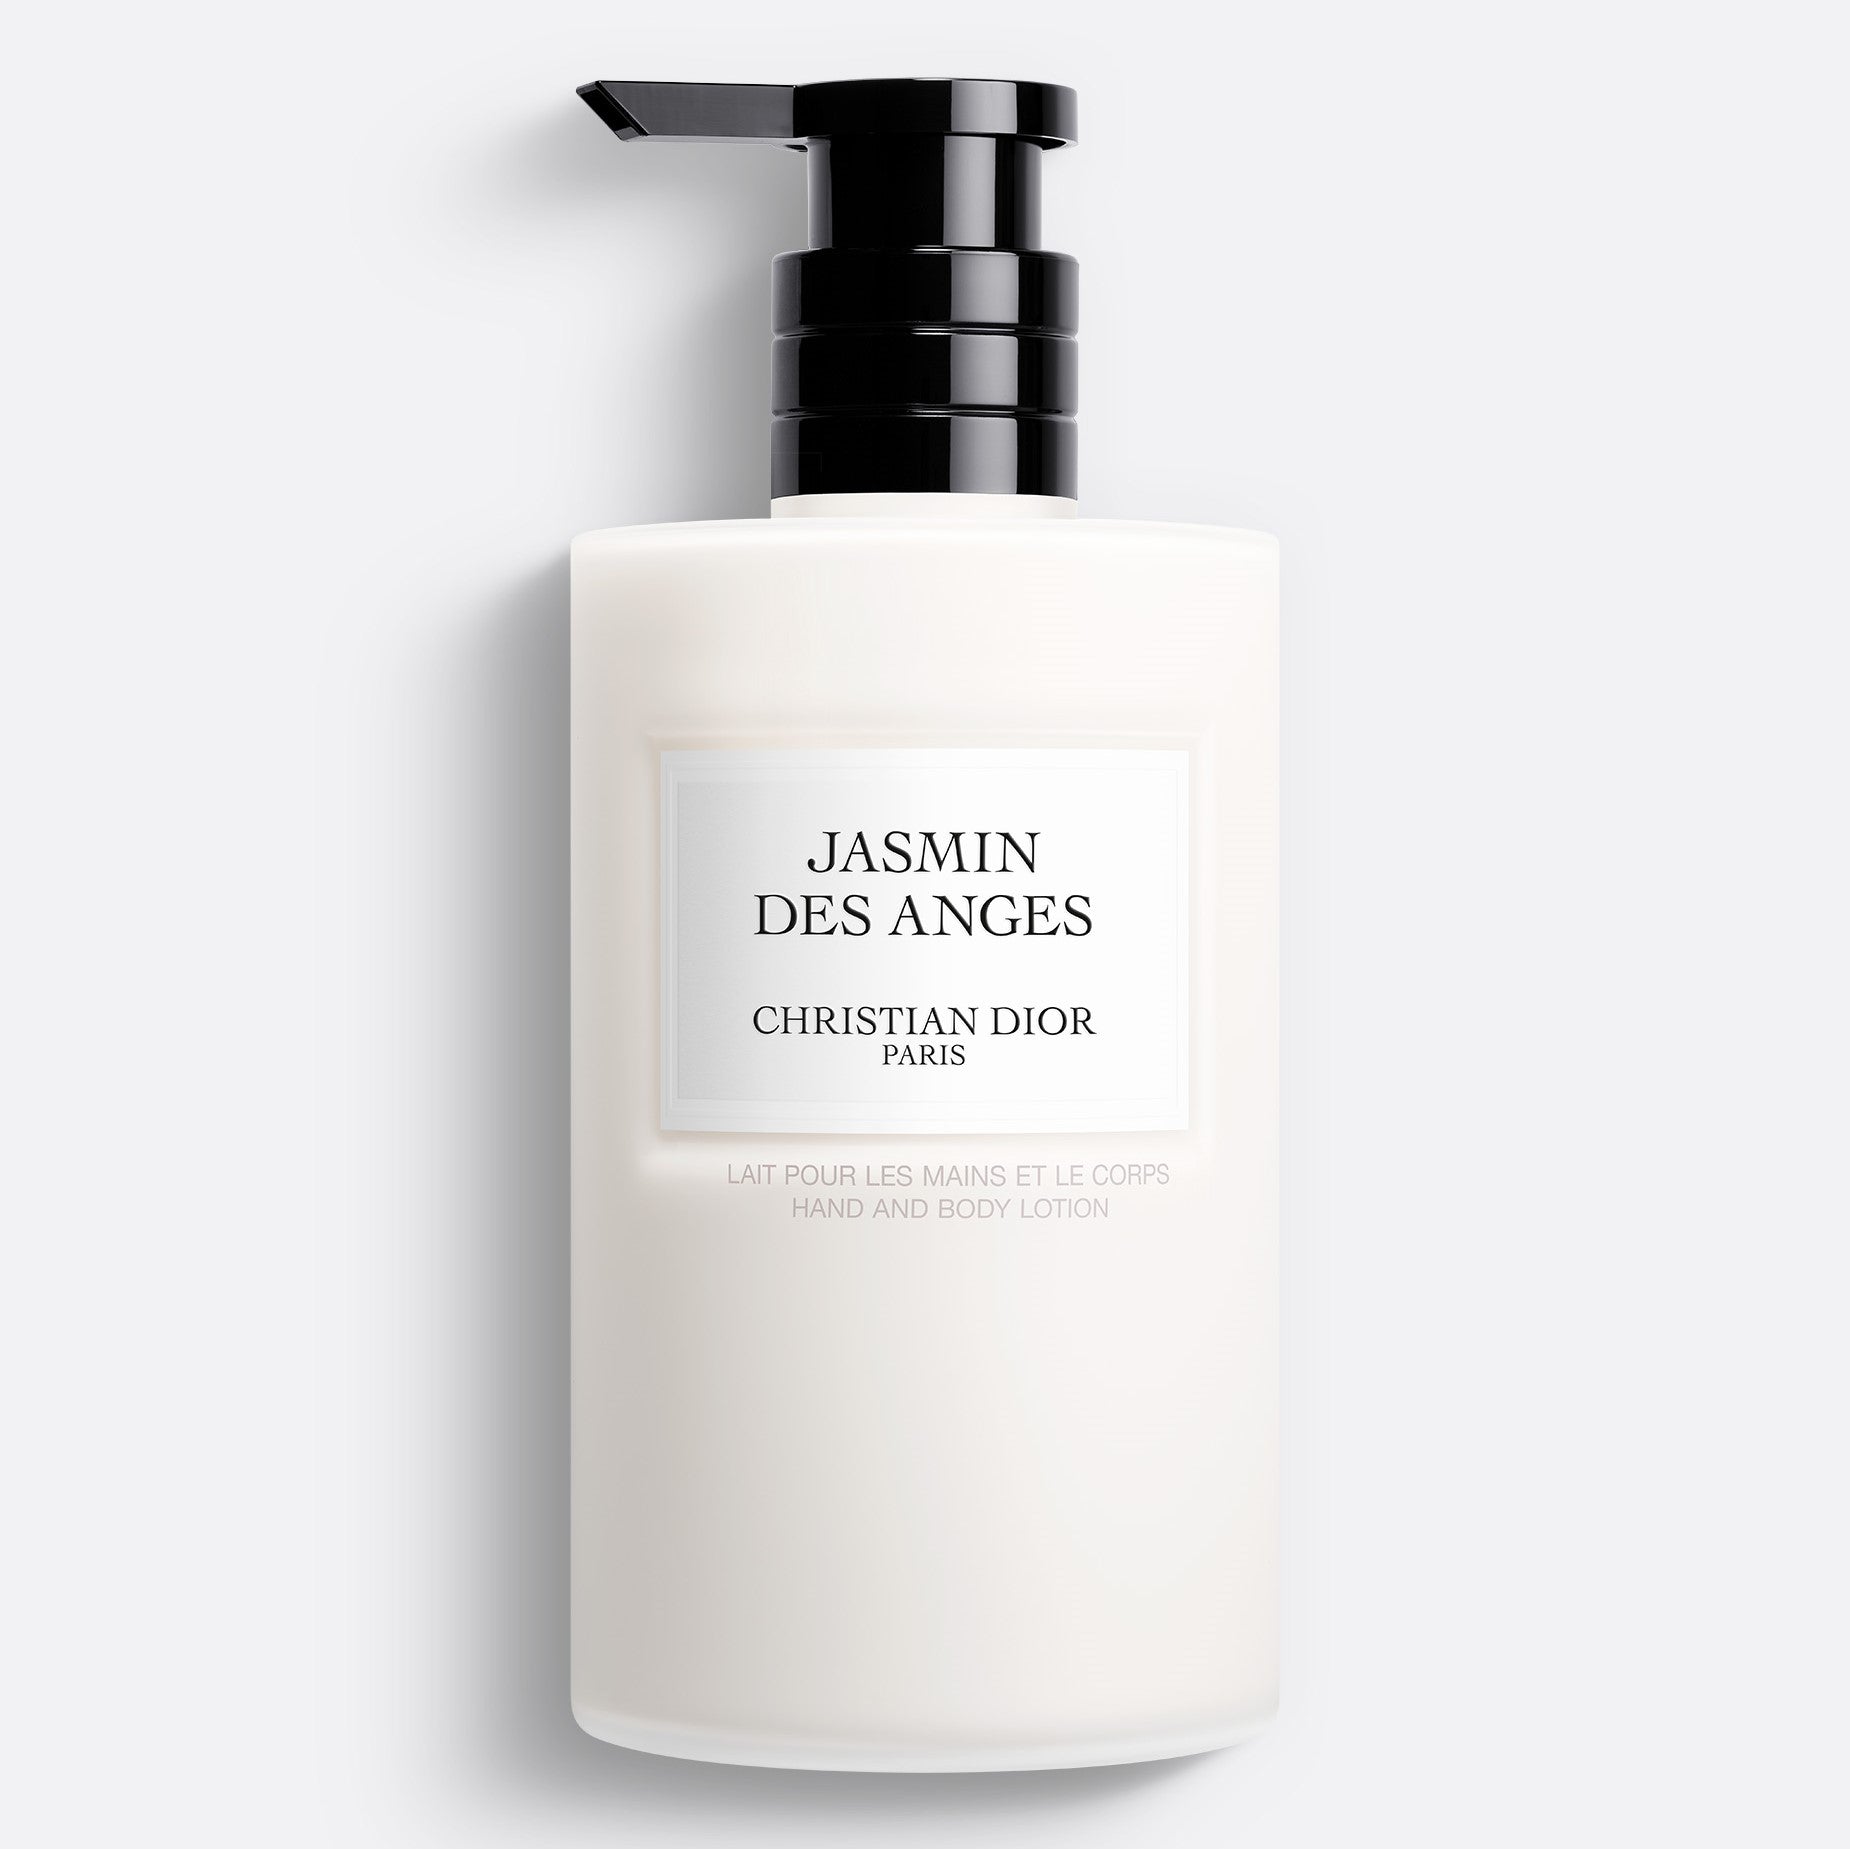 JASMIN DES ANGES HYDRATING LOTION ~ Hand and Body Lotion